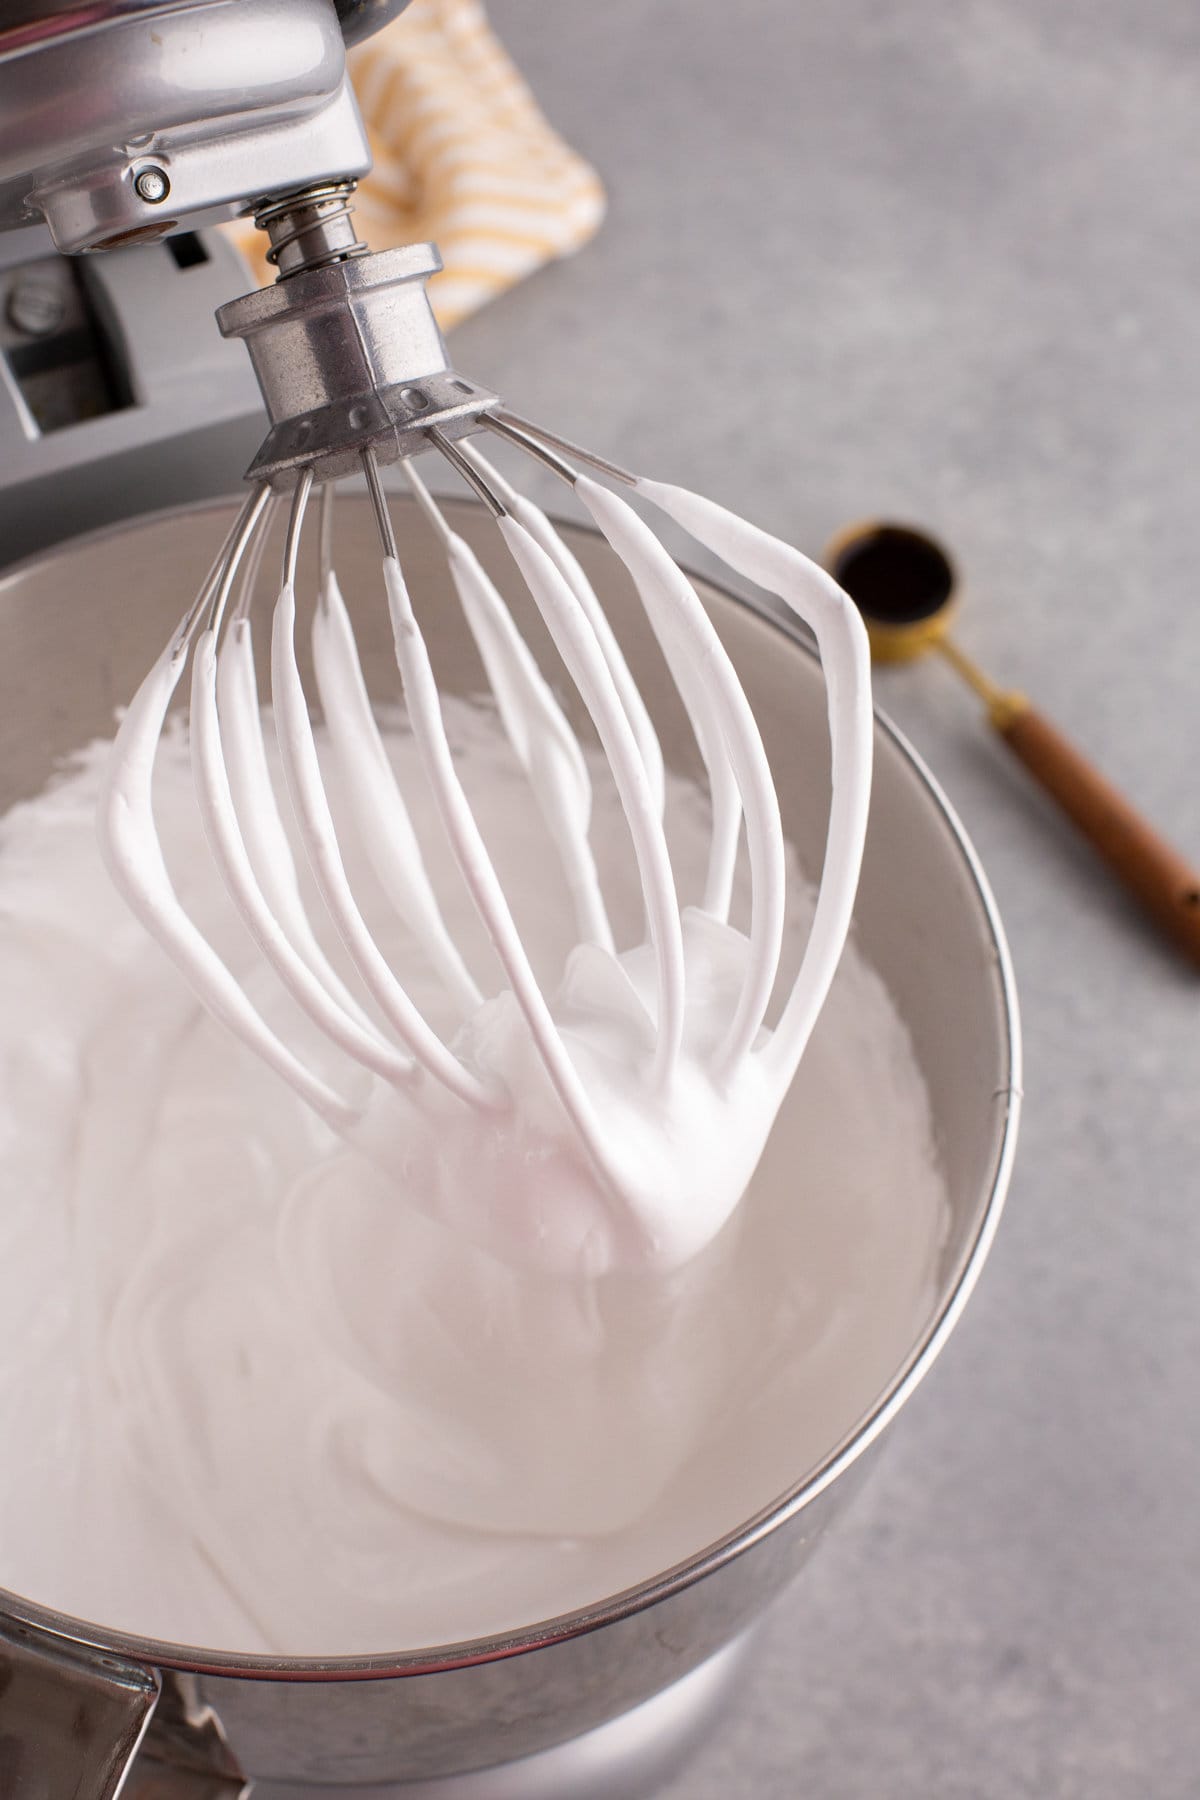 Stand mixer head tilted back to show whisk attachment with white fluffy marshmallow mixture on it.